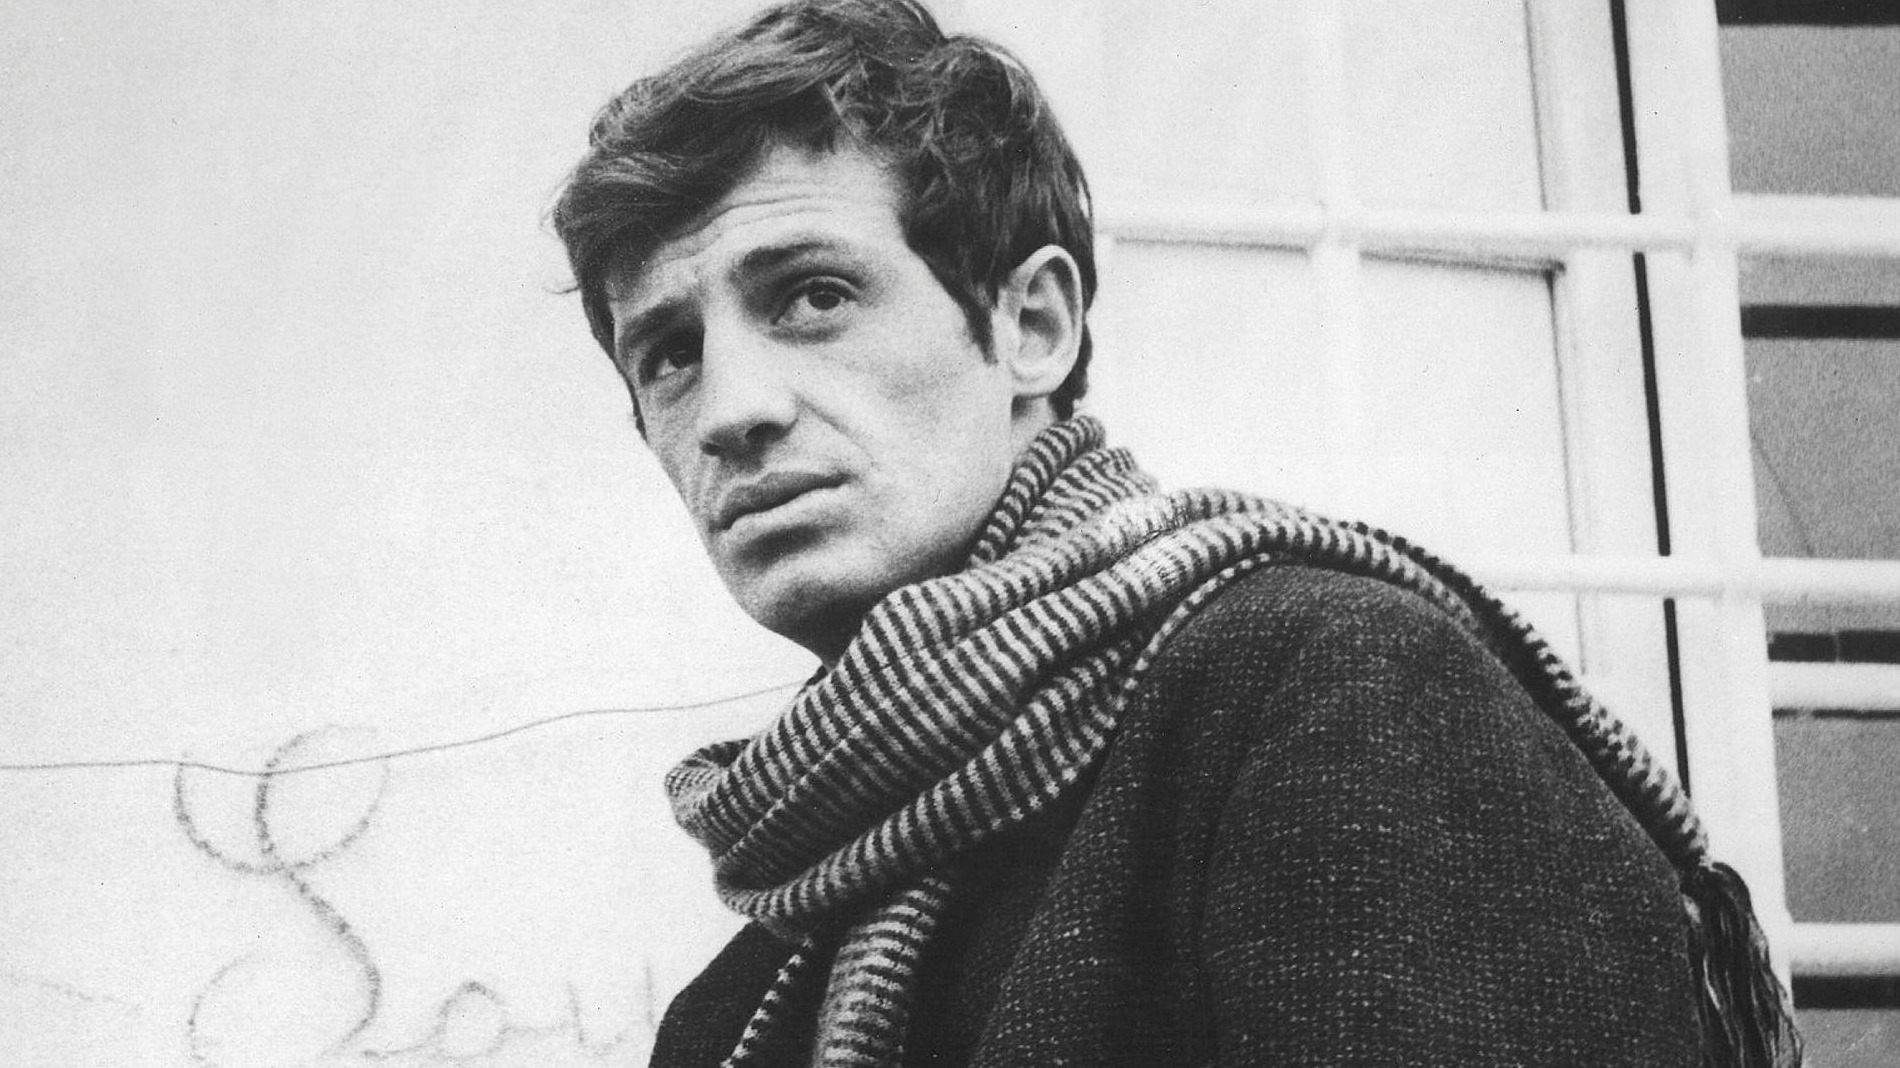 Jean Paul Belmondo French Iconic Actor known for ‘Breathless’ Passed Away at 88..